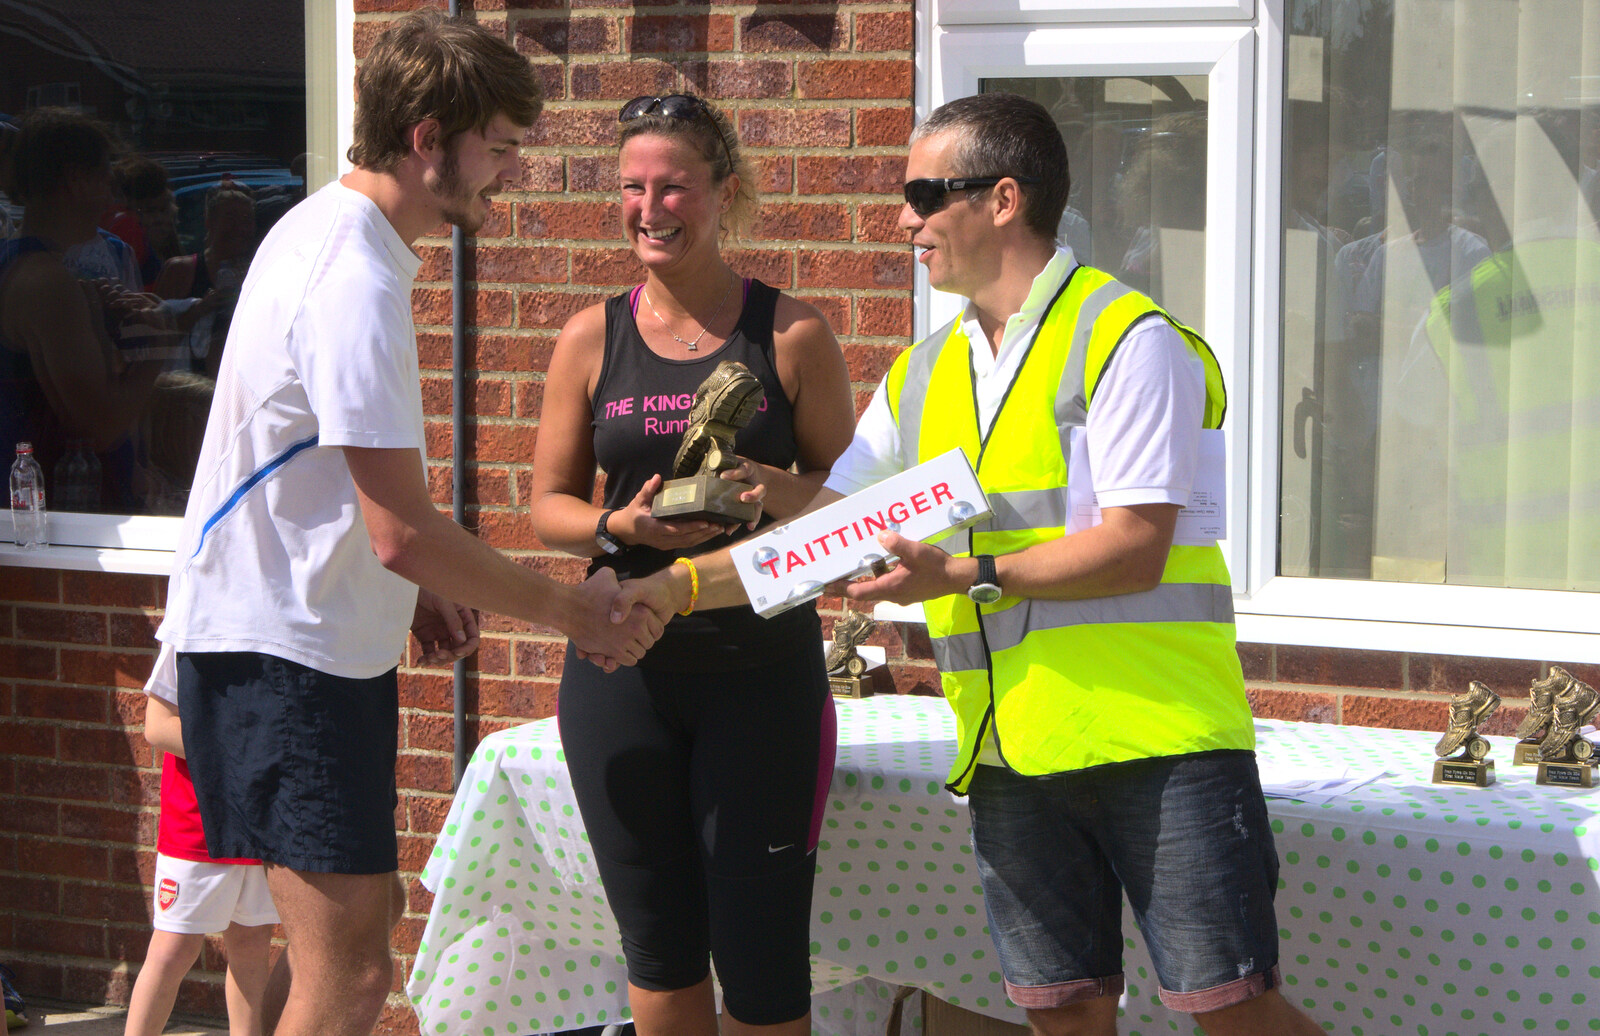 More prizes are handed out from The Framlingham 10k Run, Suffolk - 31st August 2014